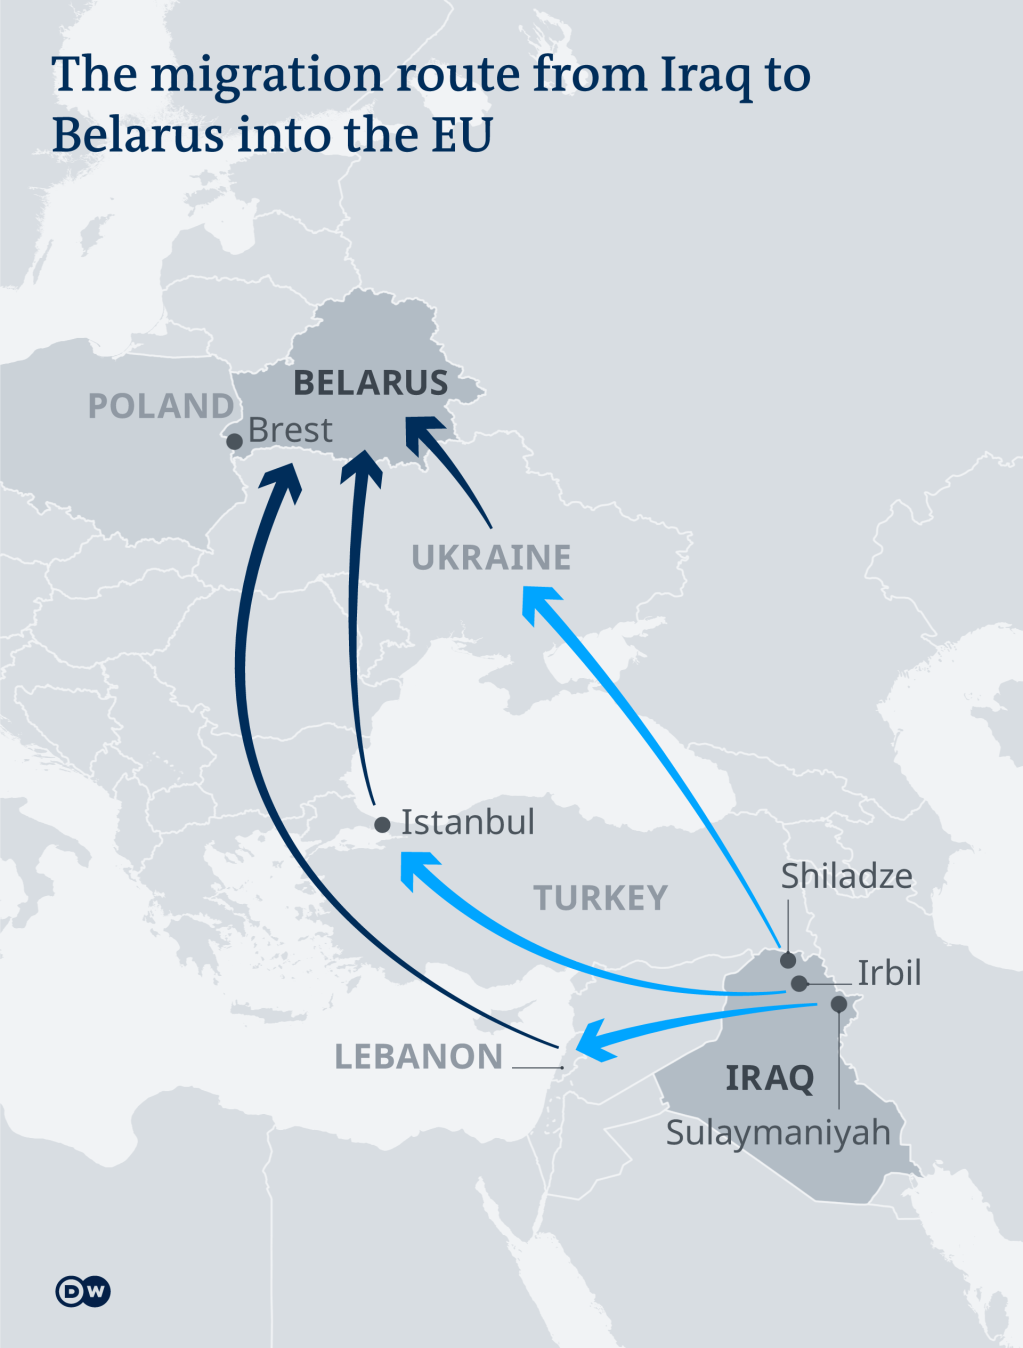 Iraqis use a different route than Syrians to get to Minsk, as visa requirements are different | Credit: DW